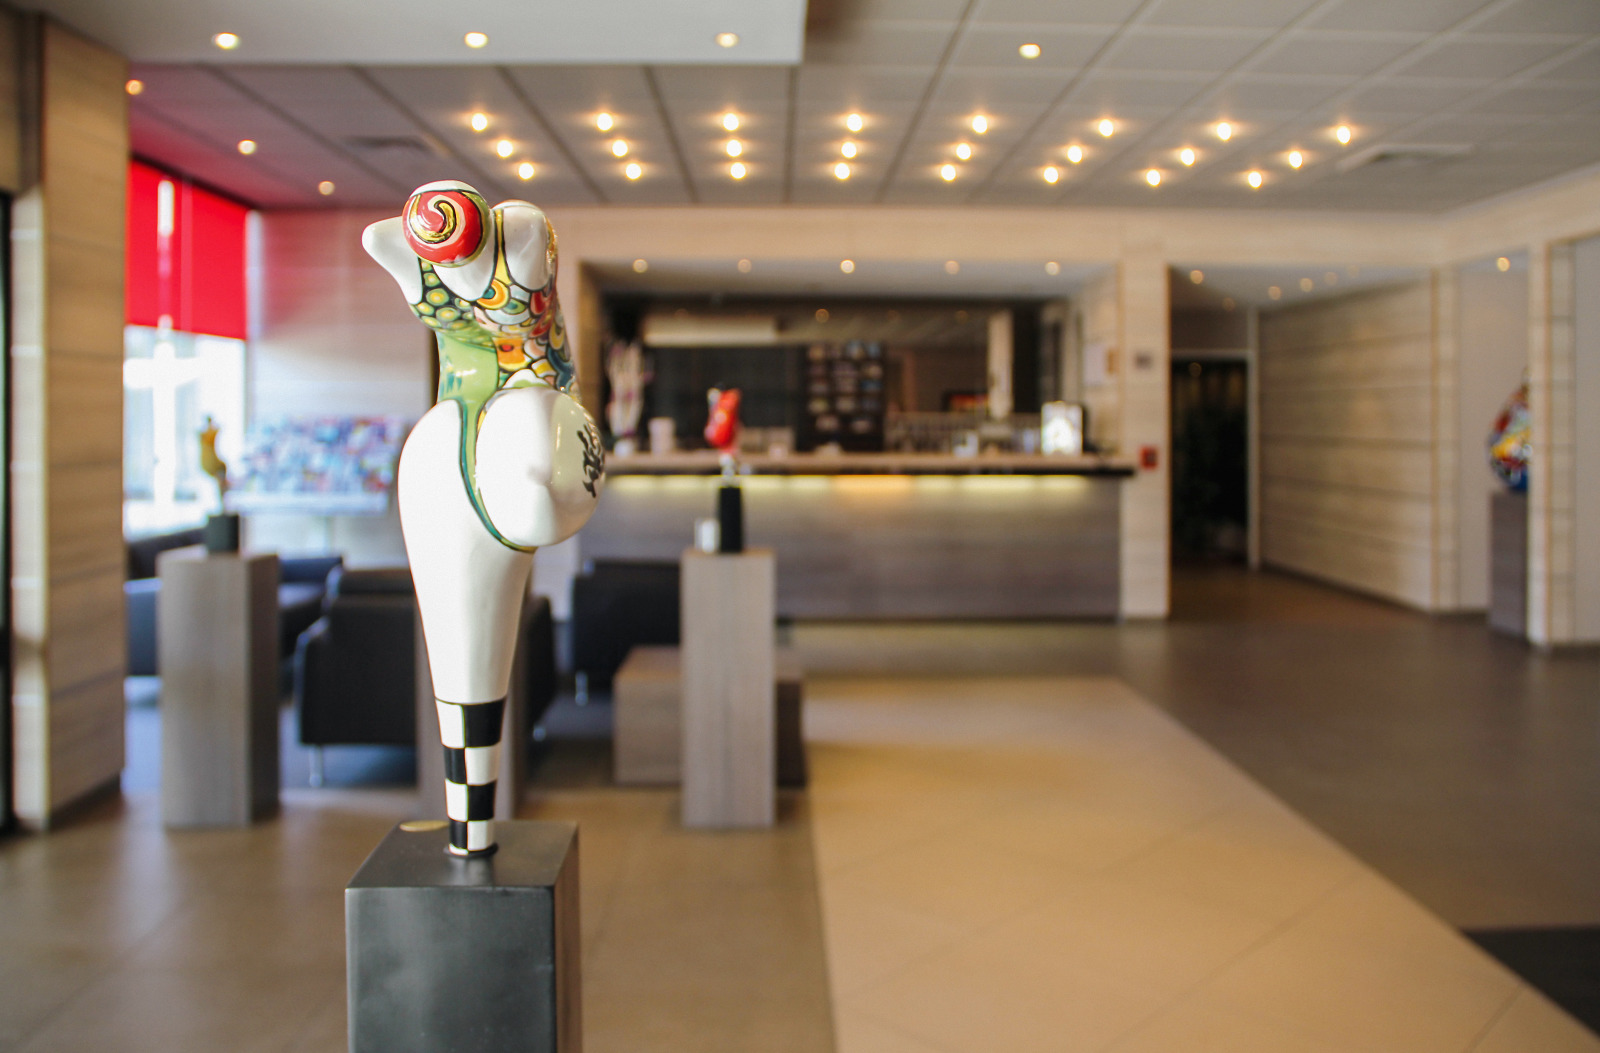 Reception of the Casteau Resort Mons hotel in Soignies, province of Hainaut